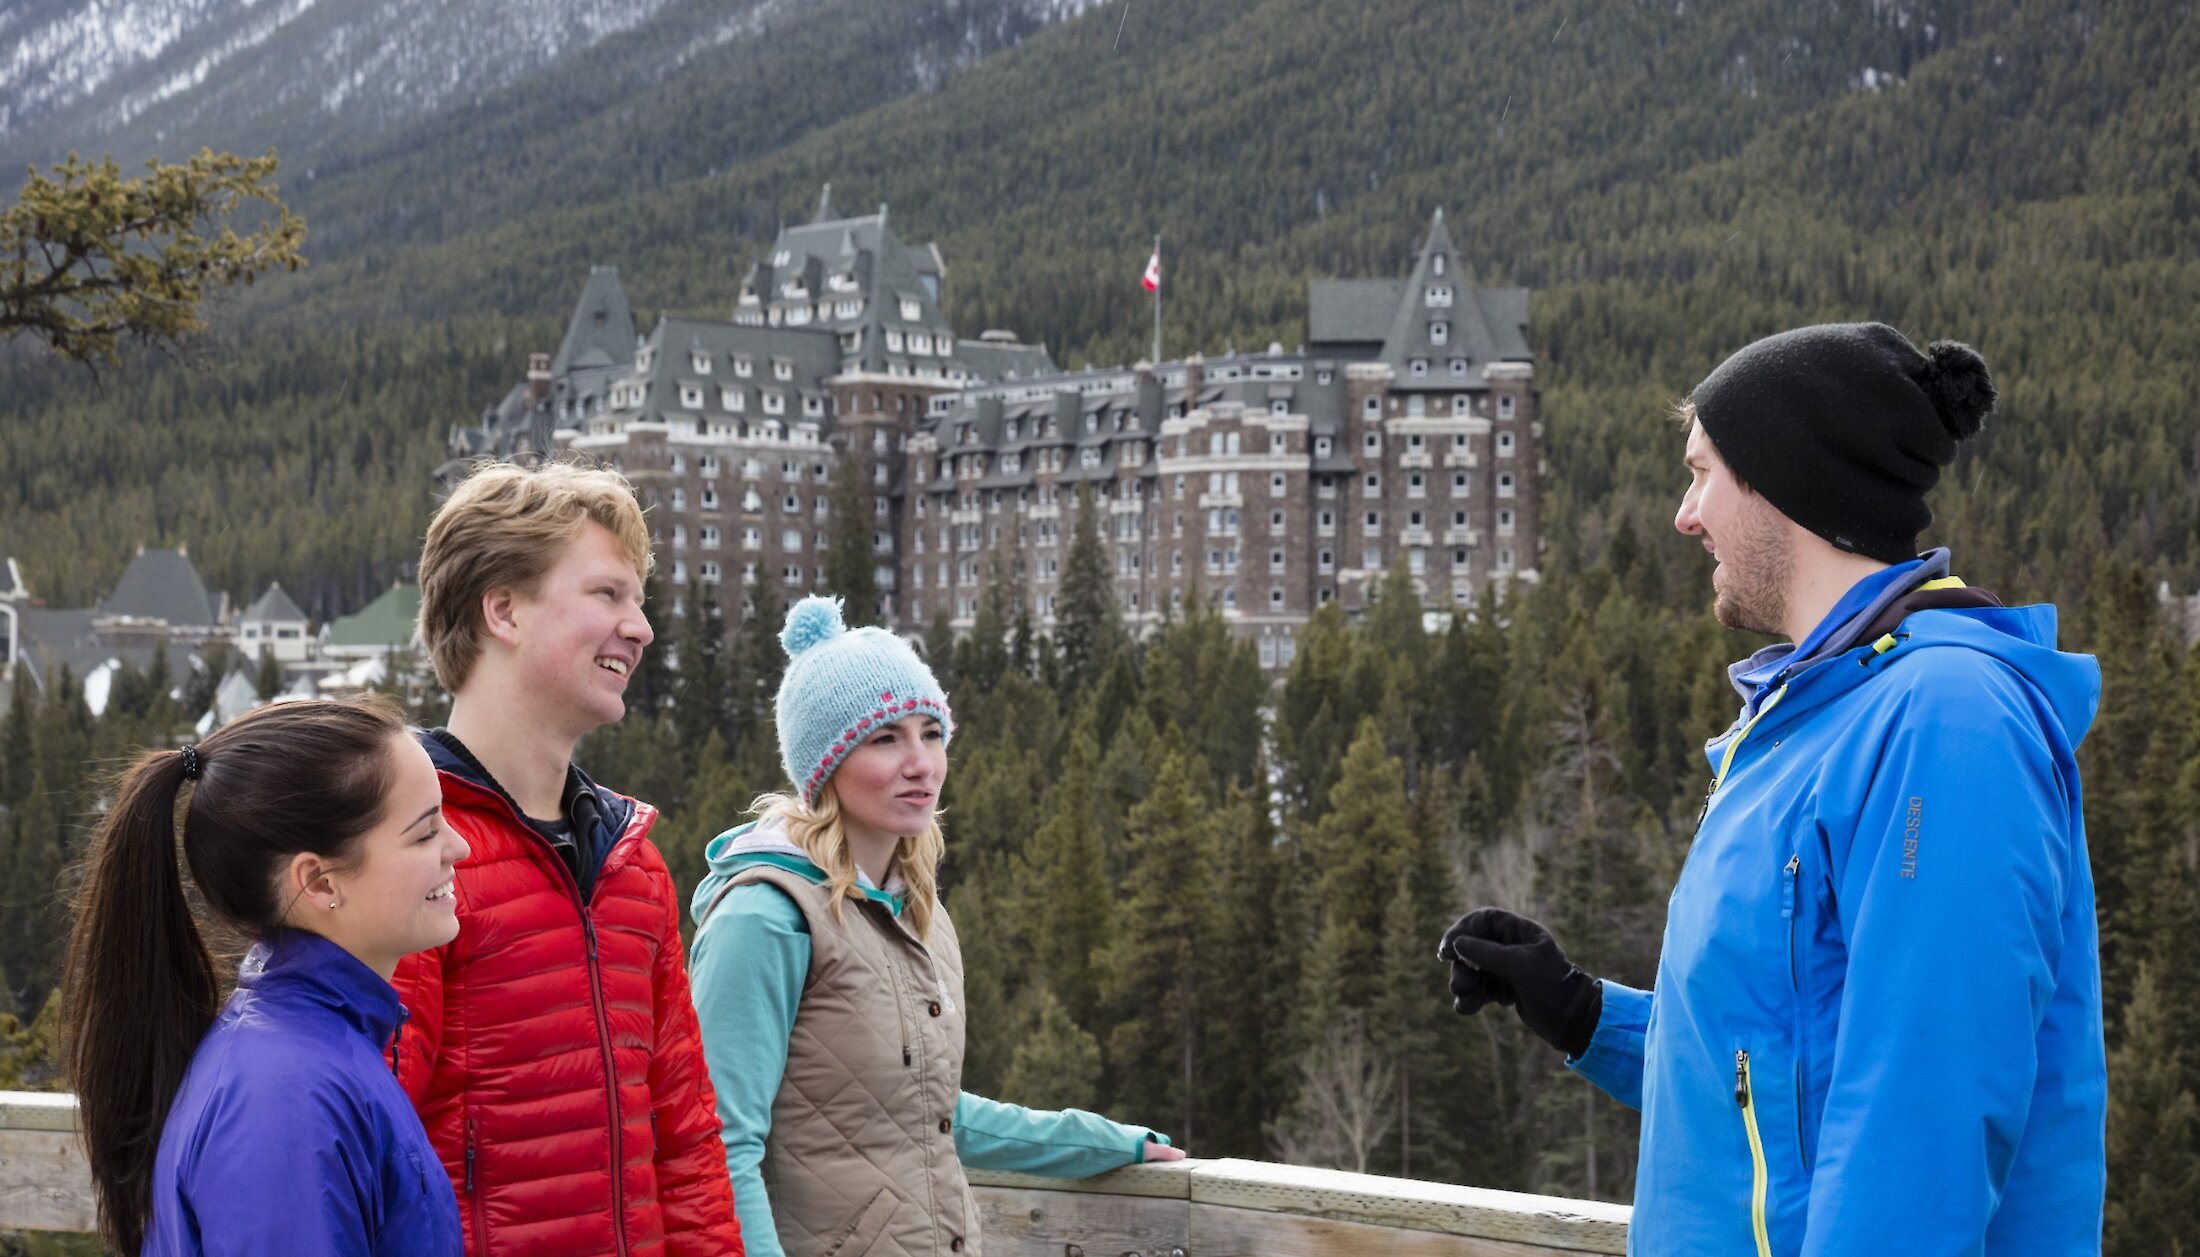 Checking out the famous Banff Springs Hotel on tour